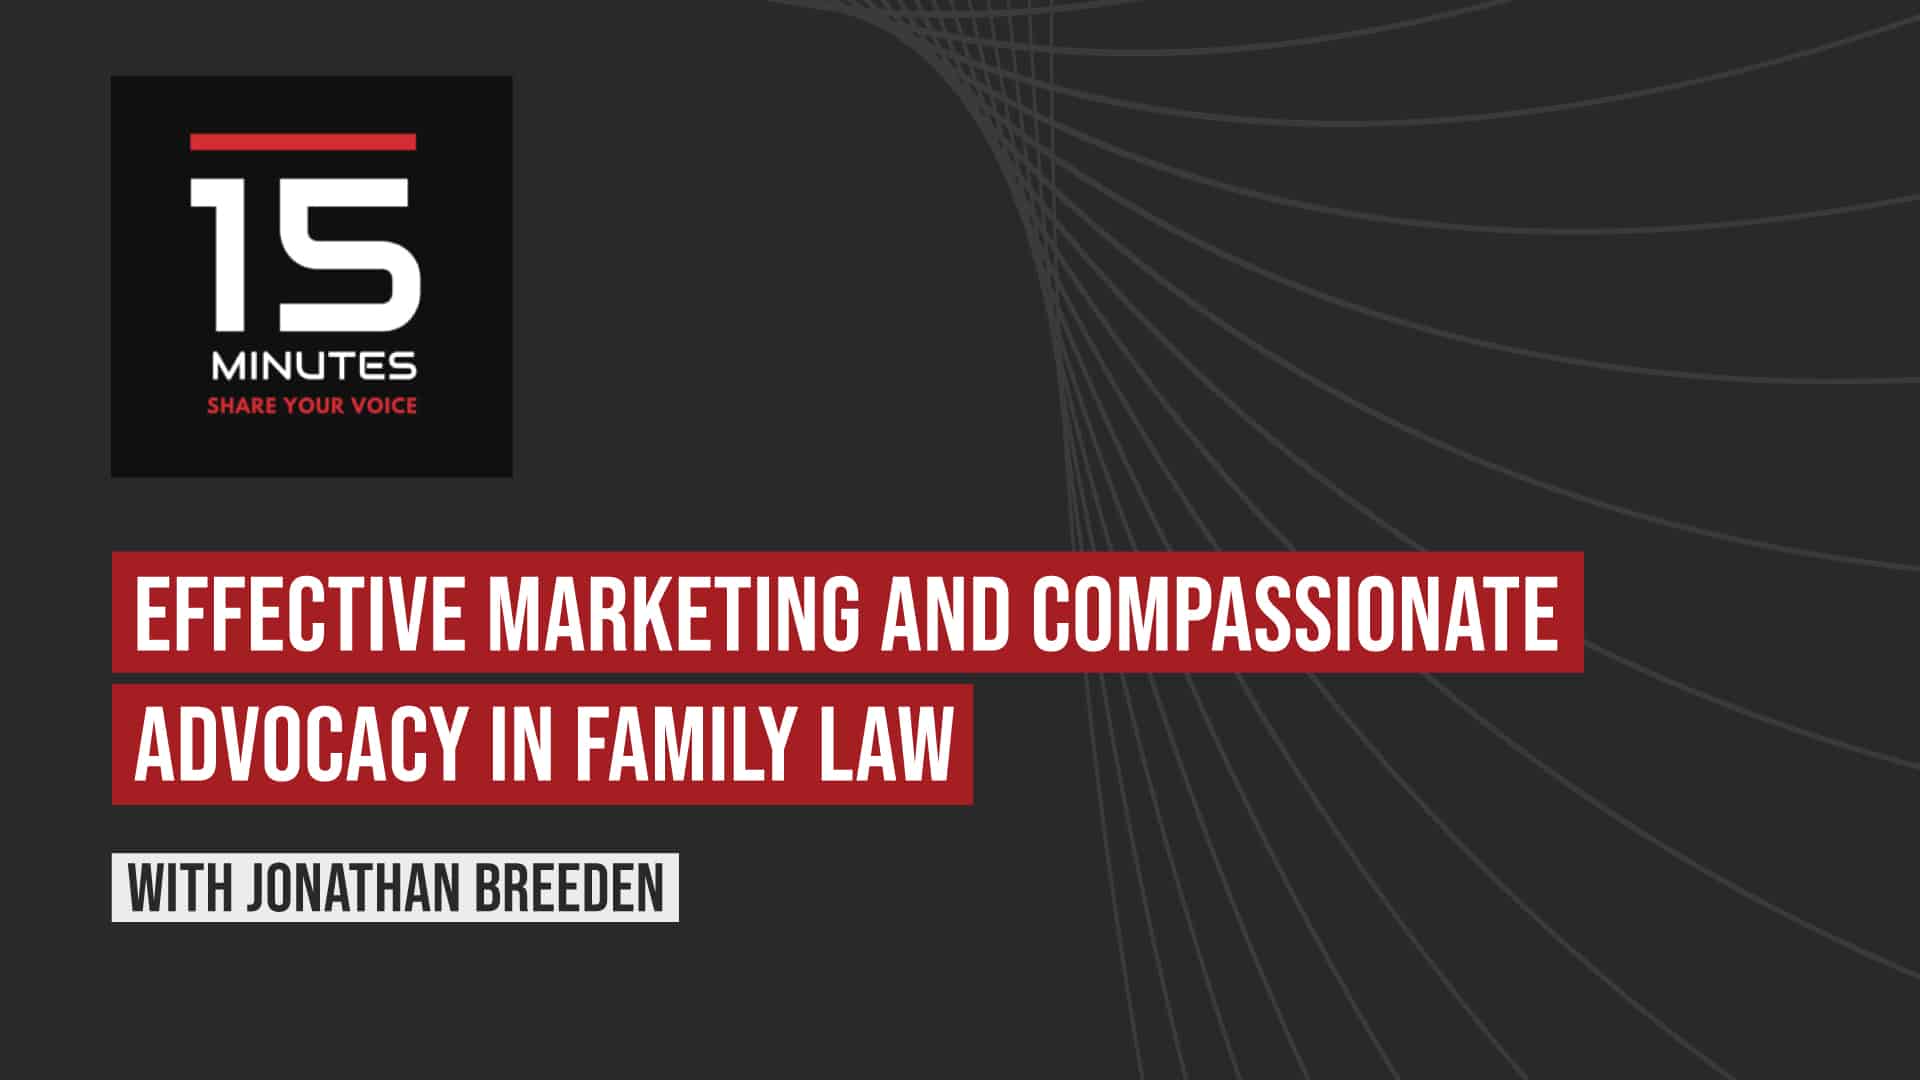 Logo: 15 Minutes, share your voice Headline: Effective marketing and compassionate advocacy in family law with Jonathan Breeden